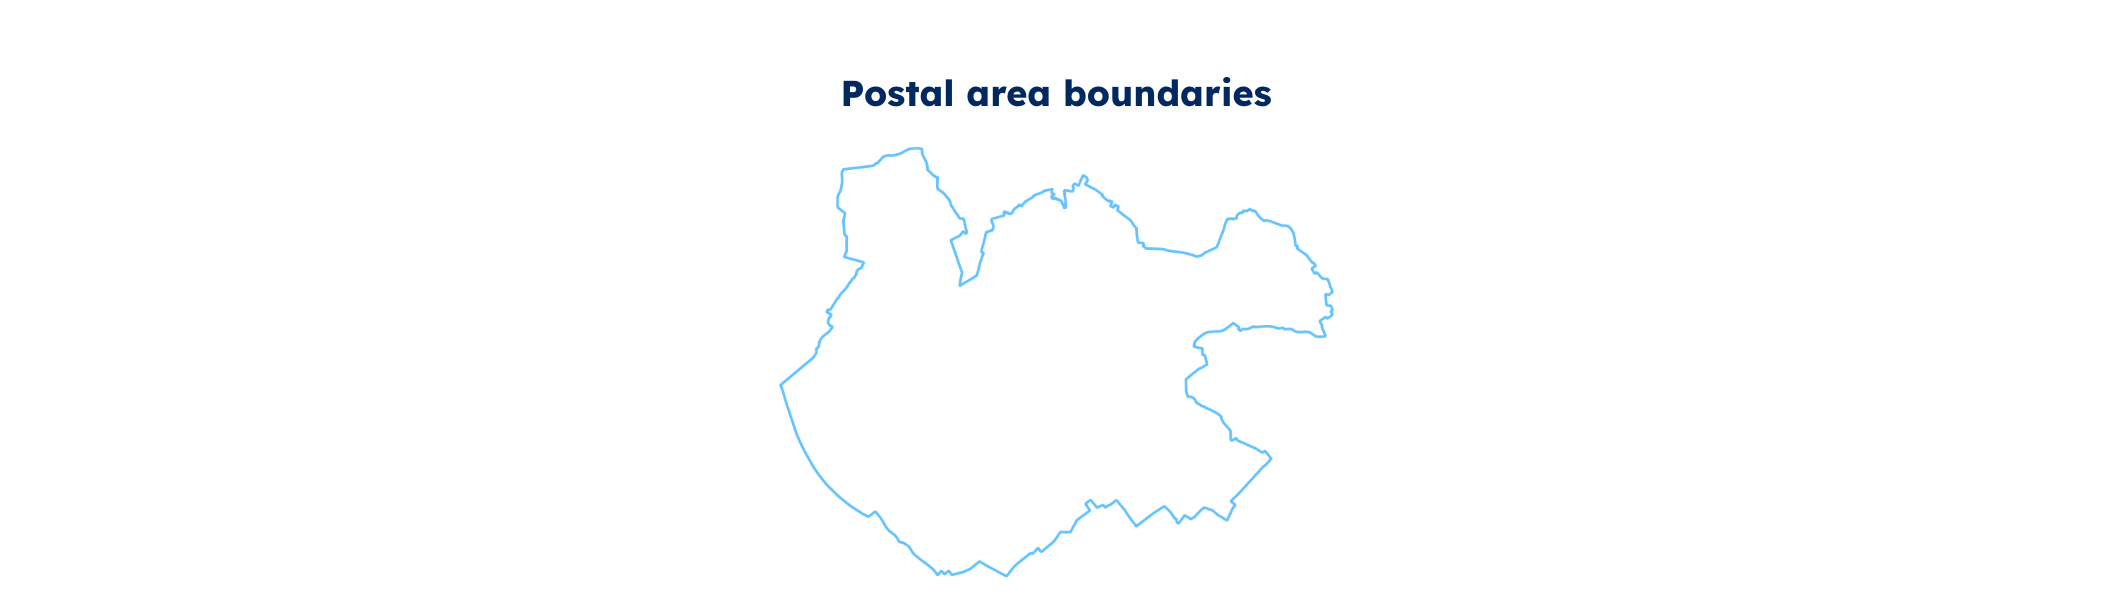 Shape files of administrative divisions and postal code areas